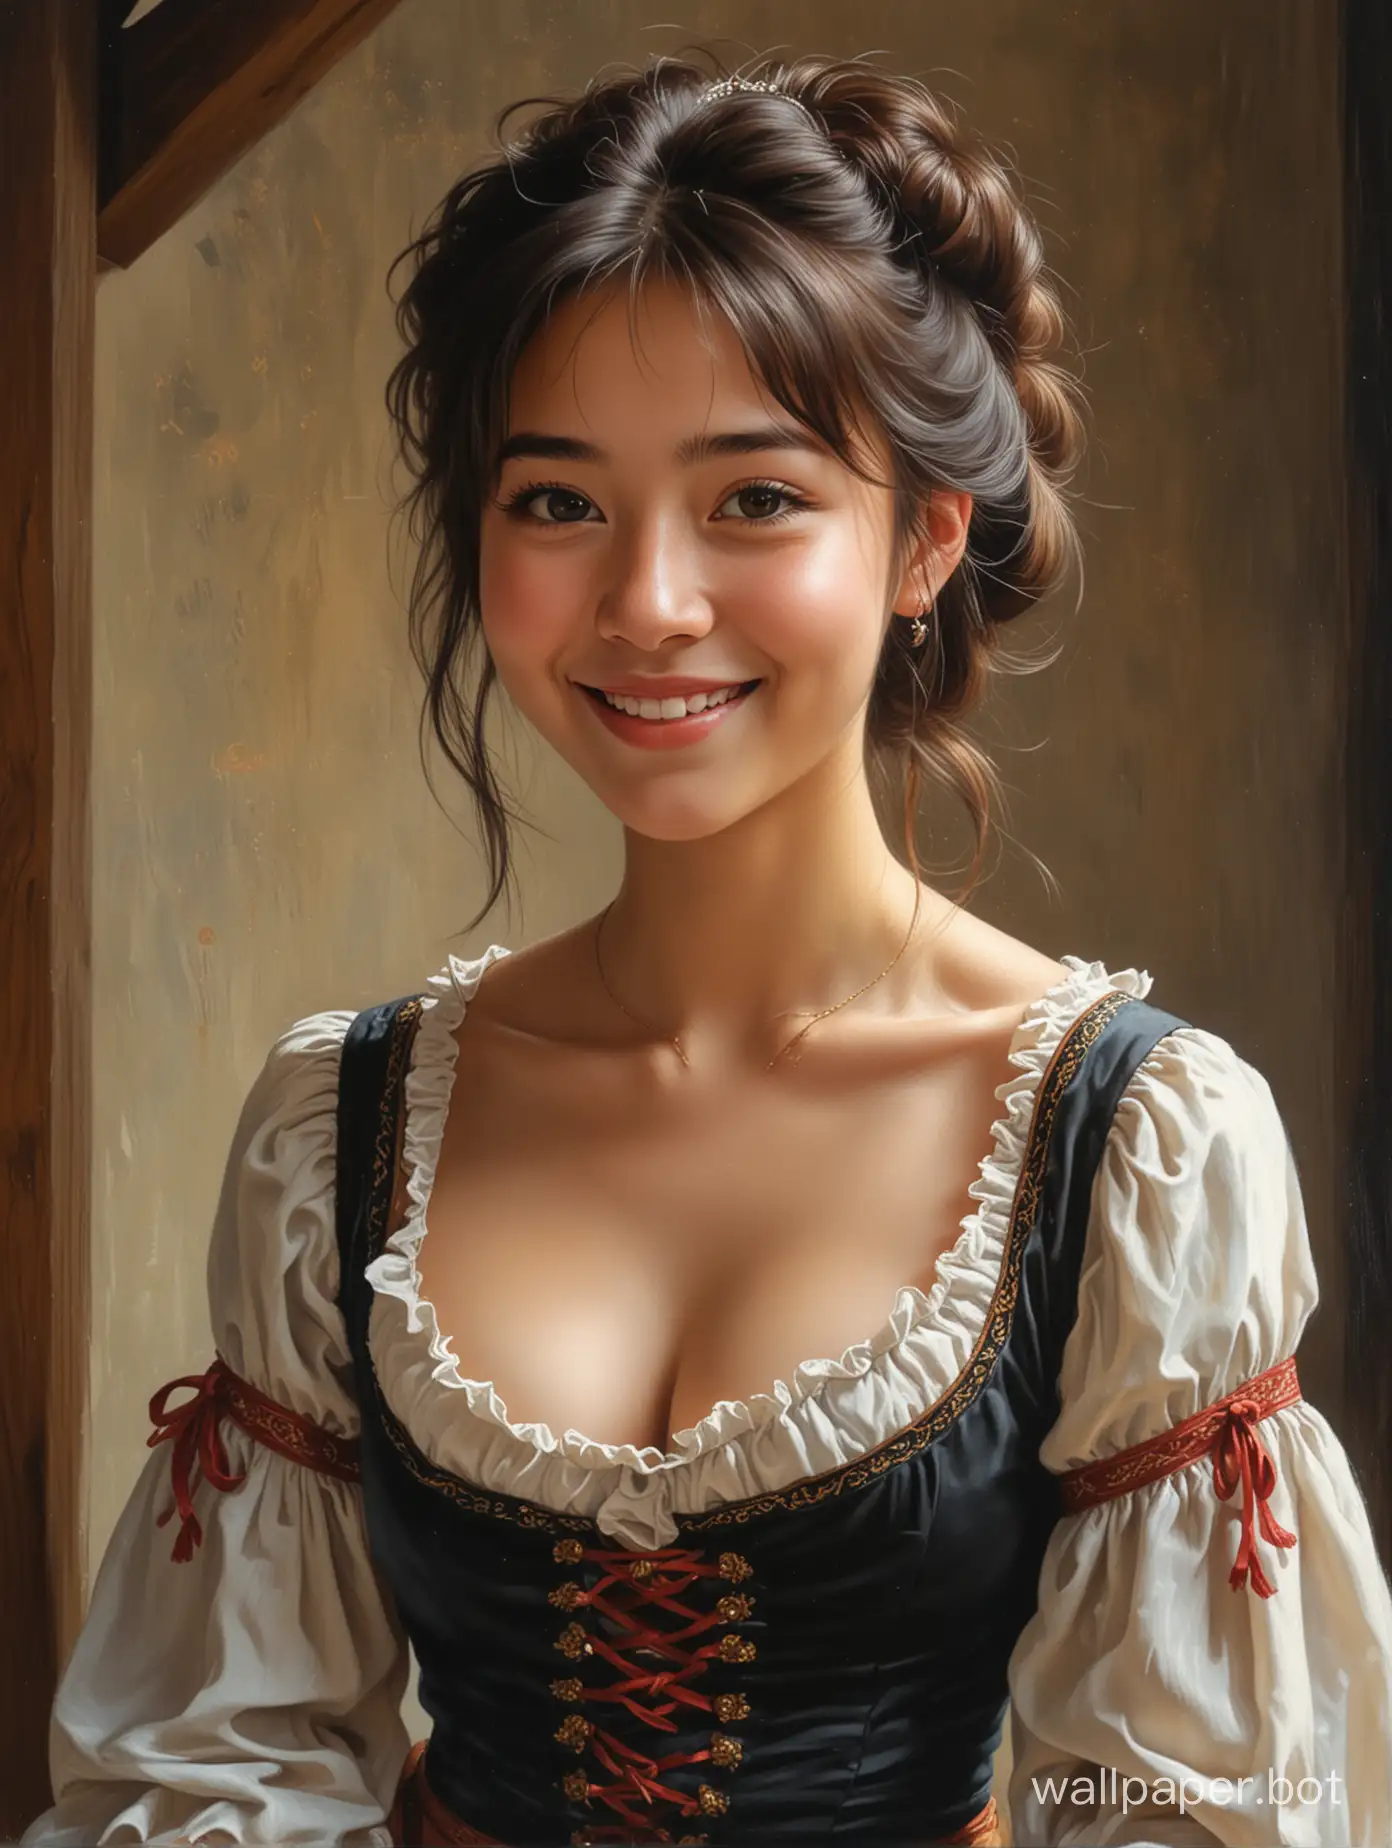 view from below, full body perspective, painting of an adorable young Kazakh teen girl, innocent and naive, Steppe Asian, cute, smiling, Turkic, she is pretty, she has amber eyes, she has long jet-black hair that is wavy and voluminous, big 80s hair, fluffy blunt bangs, midriff, chest, low-cut medieval blouse, tavern wench, deep plunging v, cleavage, small and petite, she has a beautiful innocent face, smiling, beaming, very cute, perfect, sense of wonder, Velazquez painting style